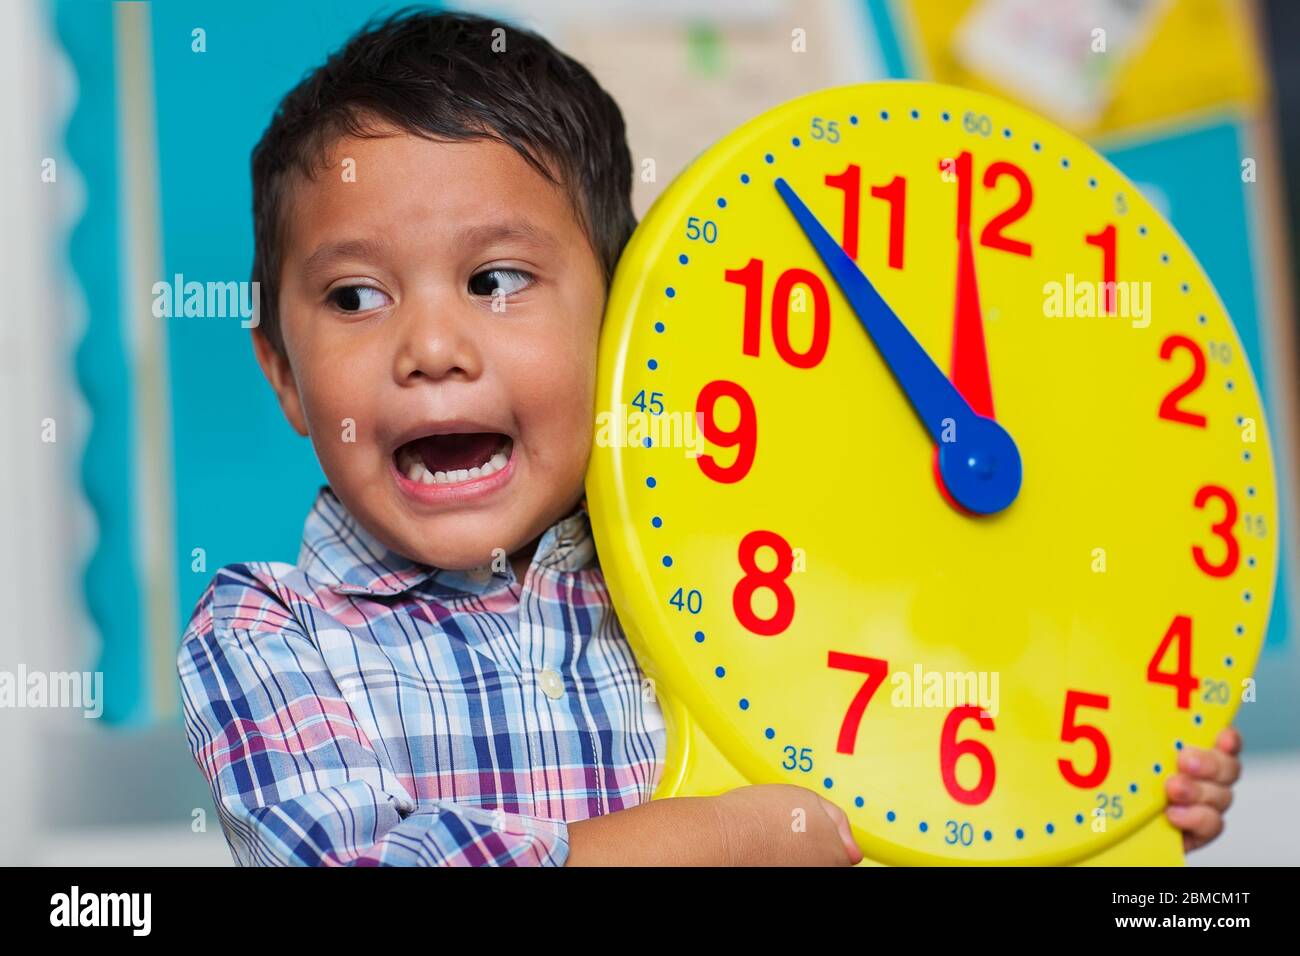 Preschool age boy yelling about what time it is, while holding a big educational analog clock for kids. Stock Photo